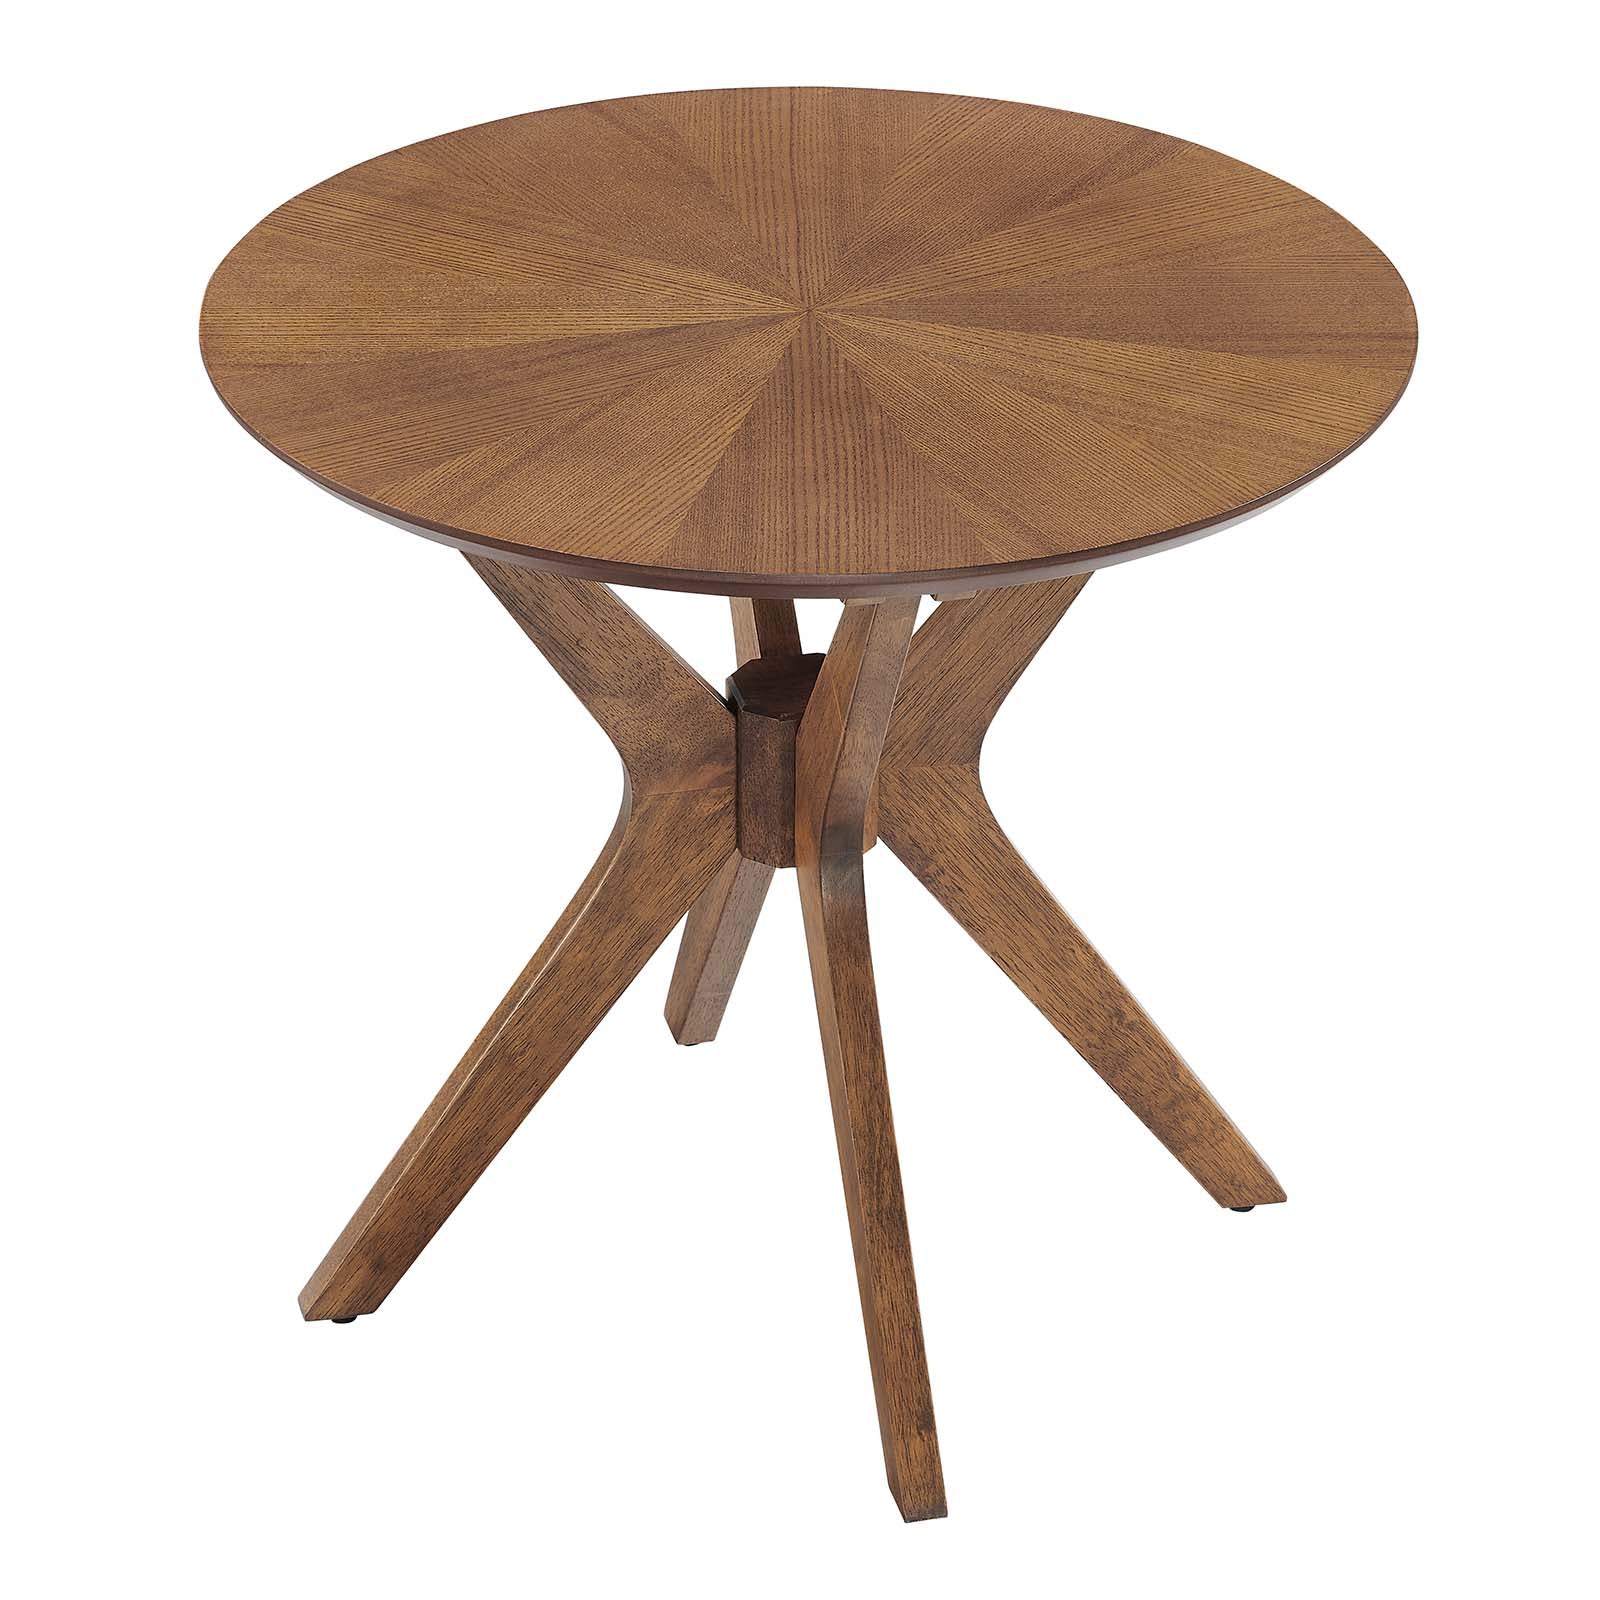 Crossroads 24” Round Wood Side Table